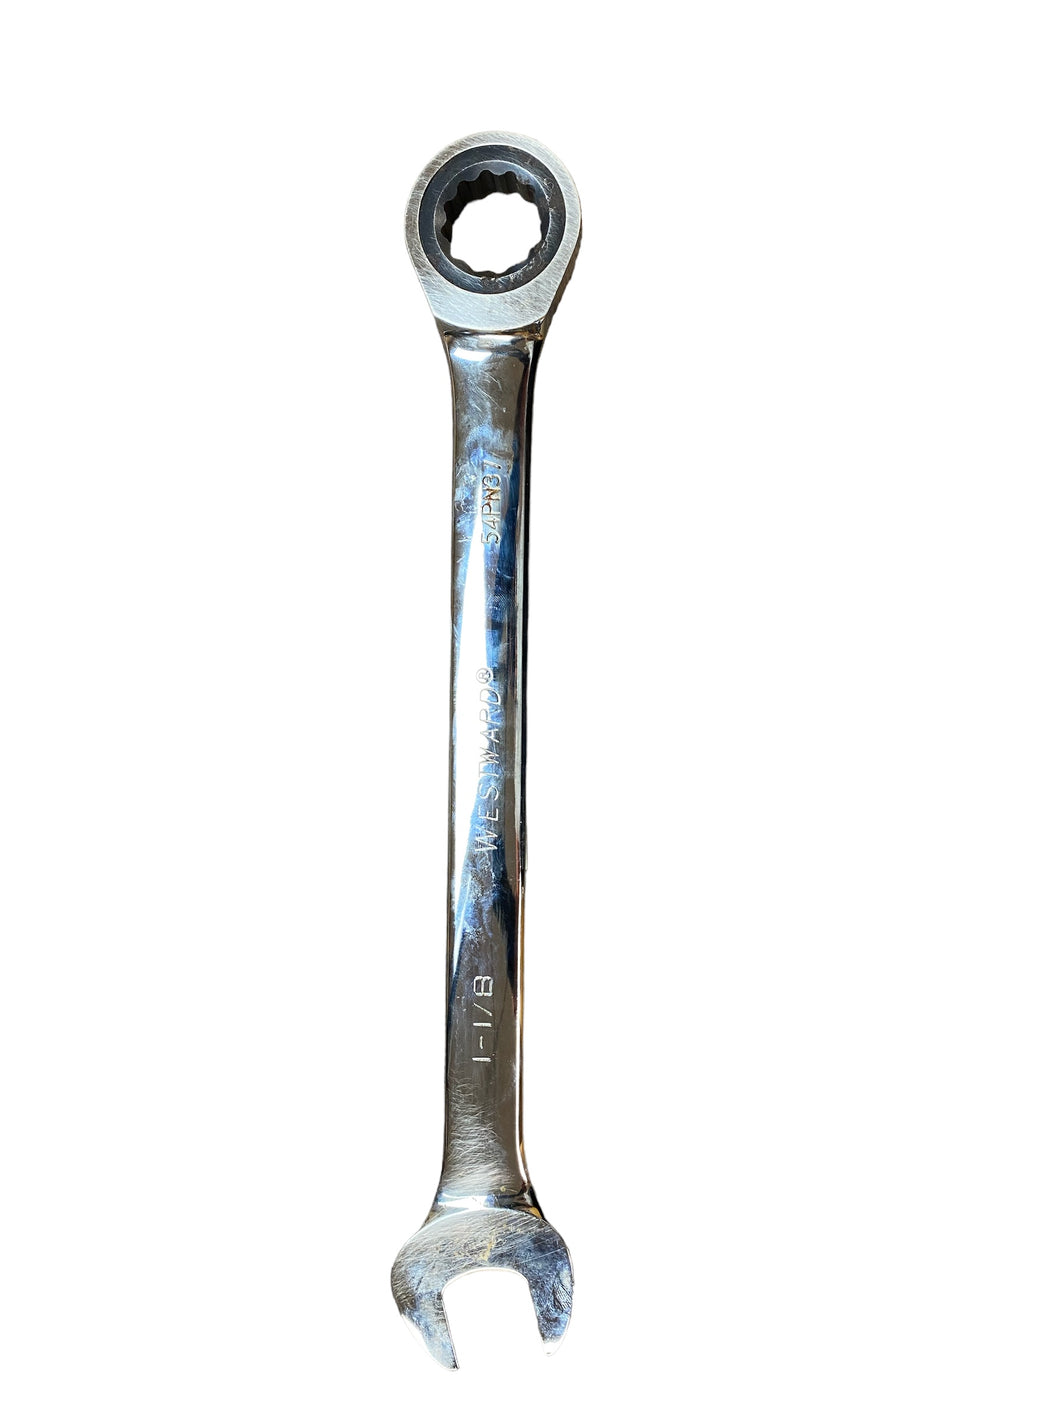 Westward Ratcheting Wrench: Alloy Steel, Chrome, 1 1/8 in Head Size, 15 3/4 in Overall Model#54PN37 - FreemanLiquidators - [product_description]